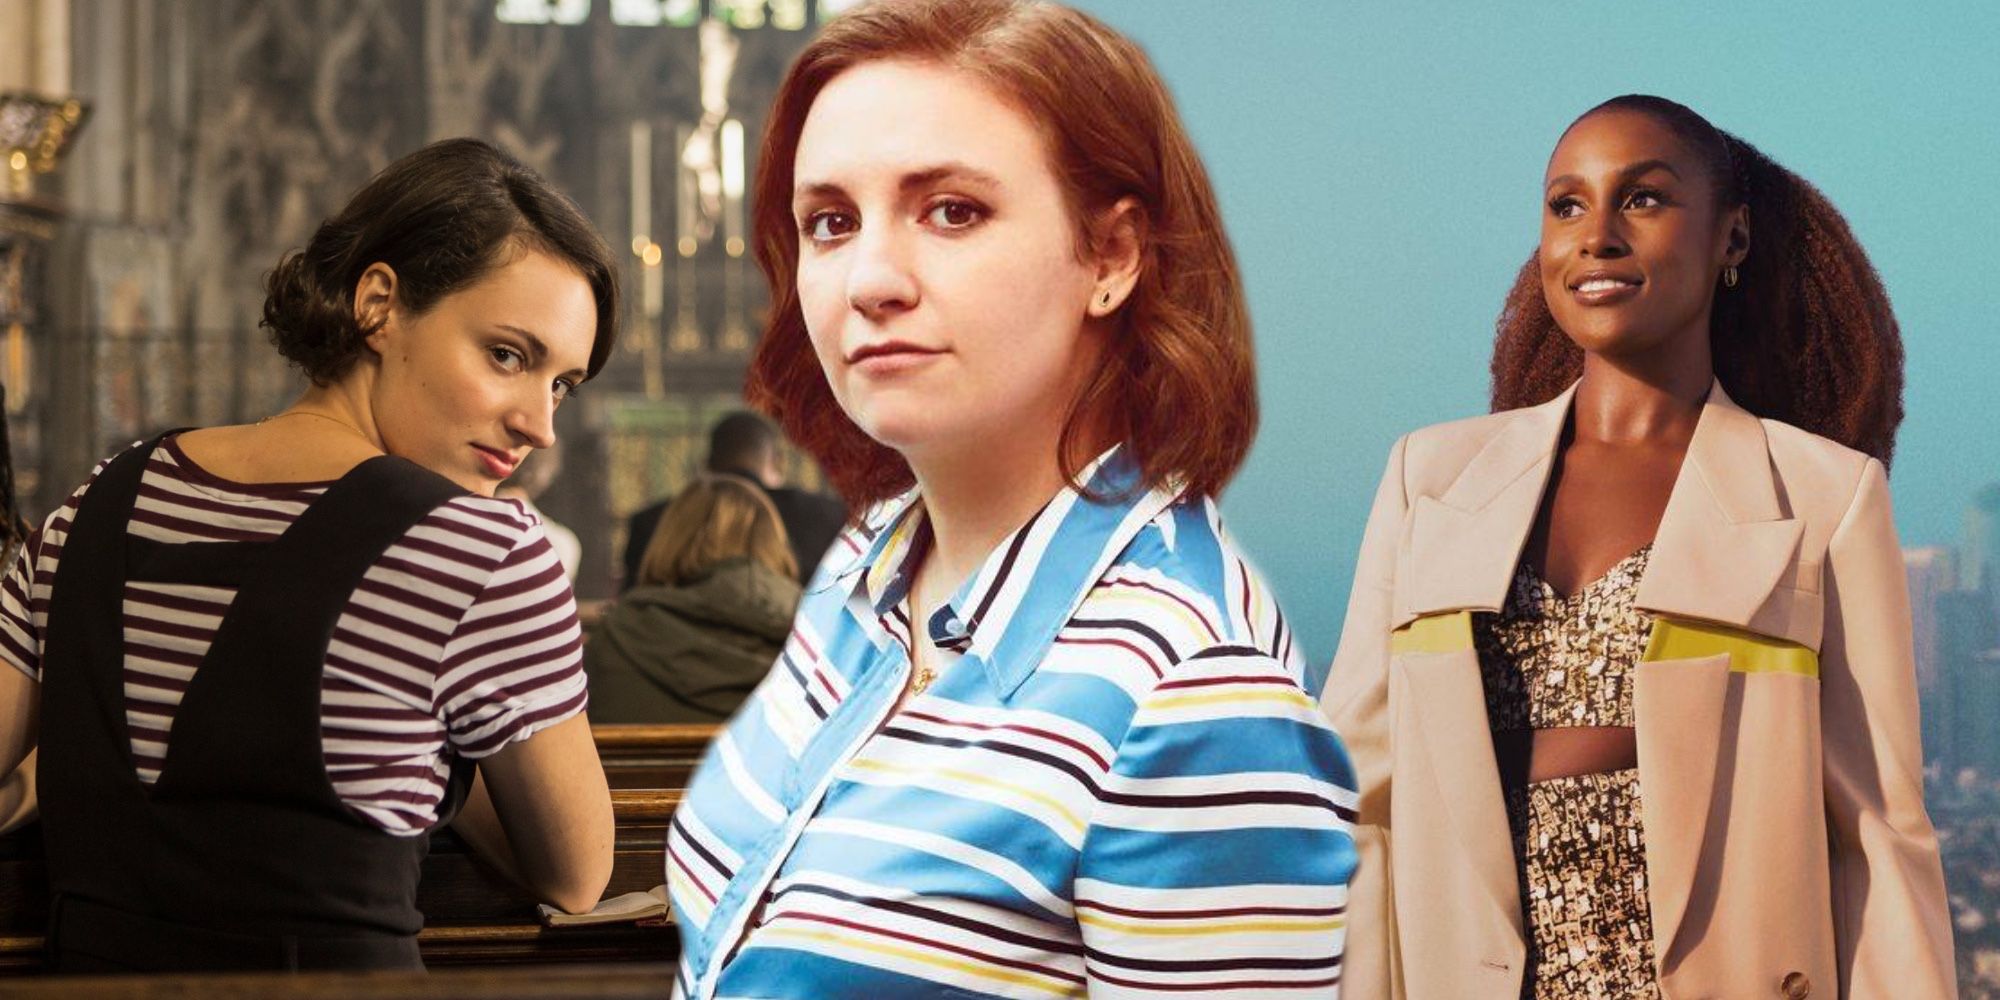 A composite image of characters from Girls, Fleabag, and Insecure